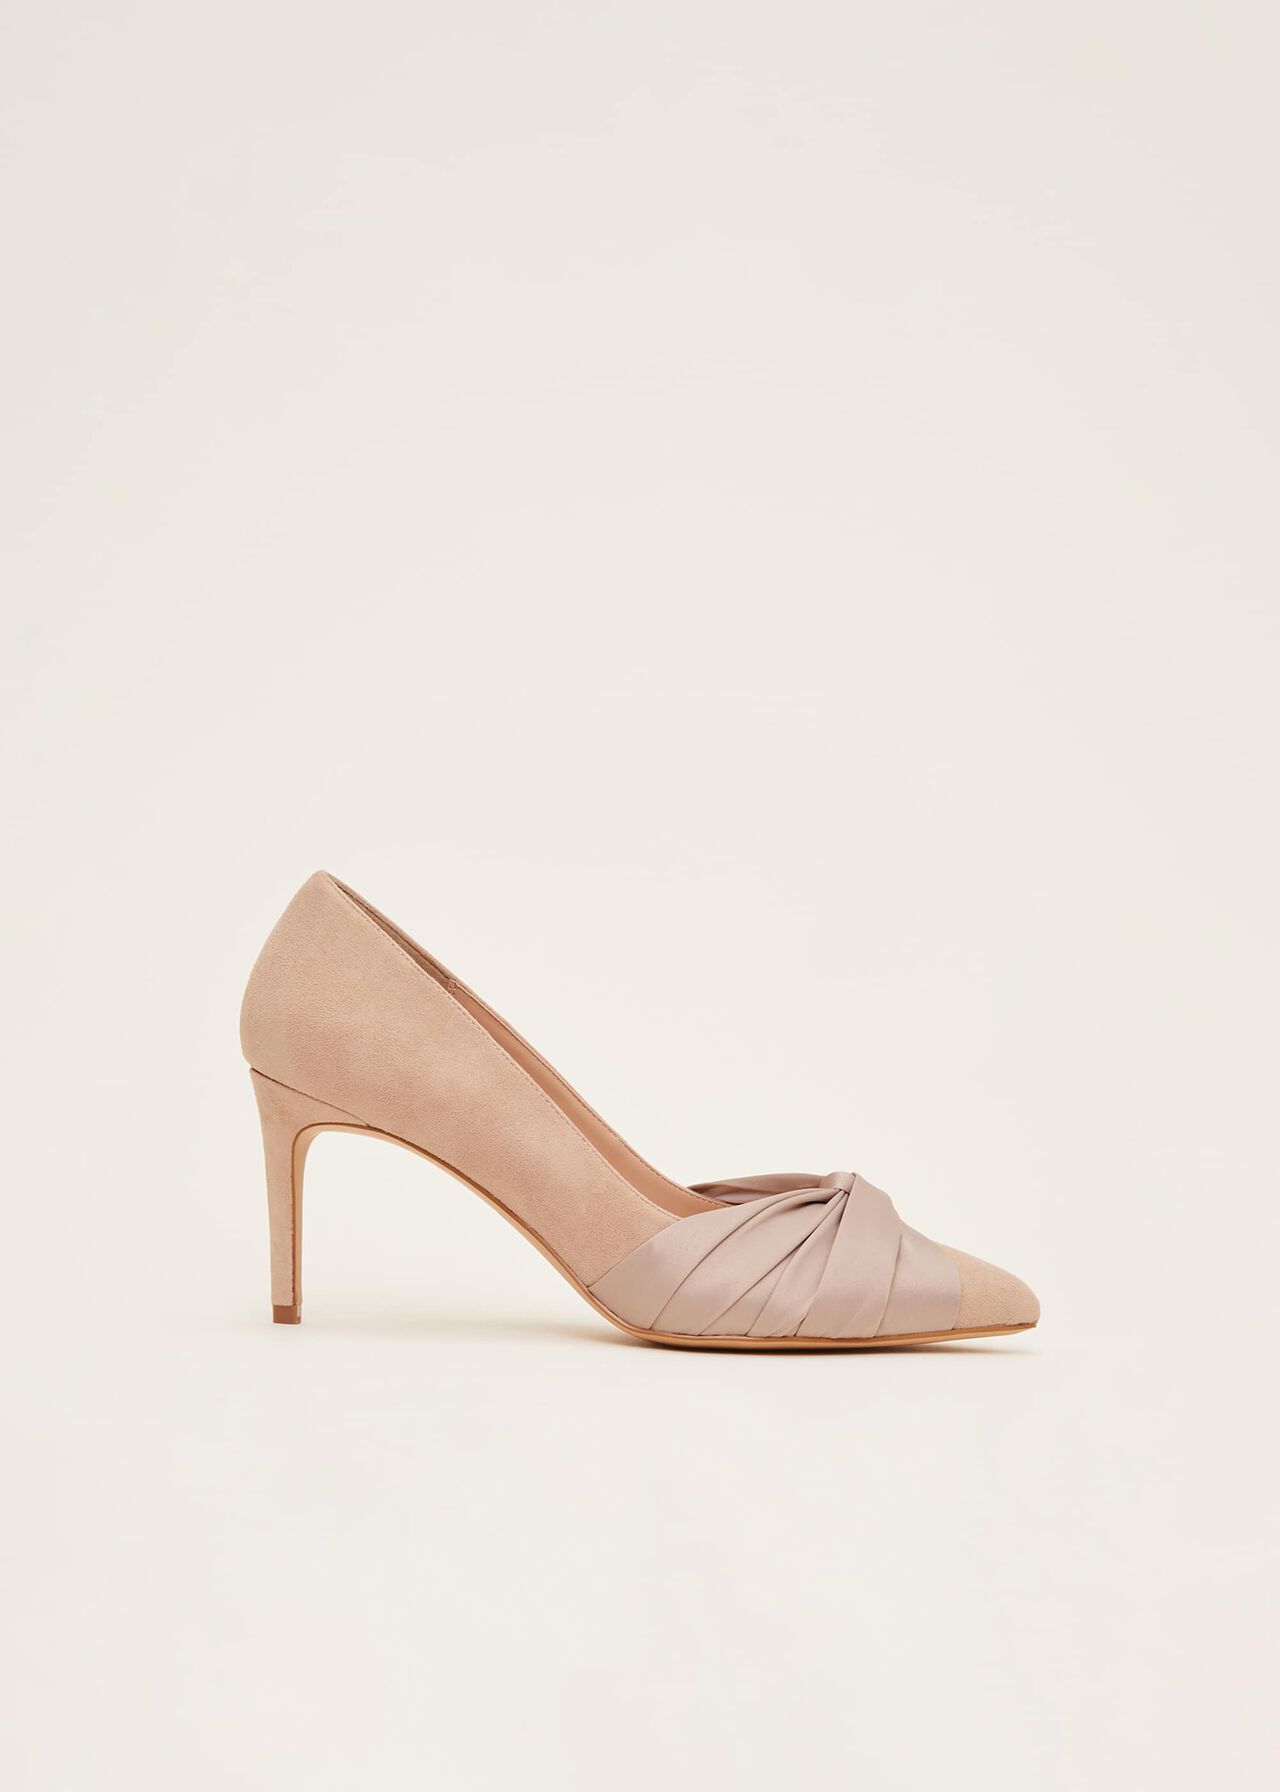 Kendal Knot Pointed Court Shoes | Phase Eight